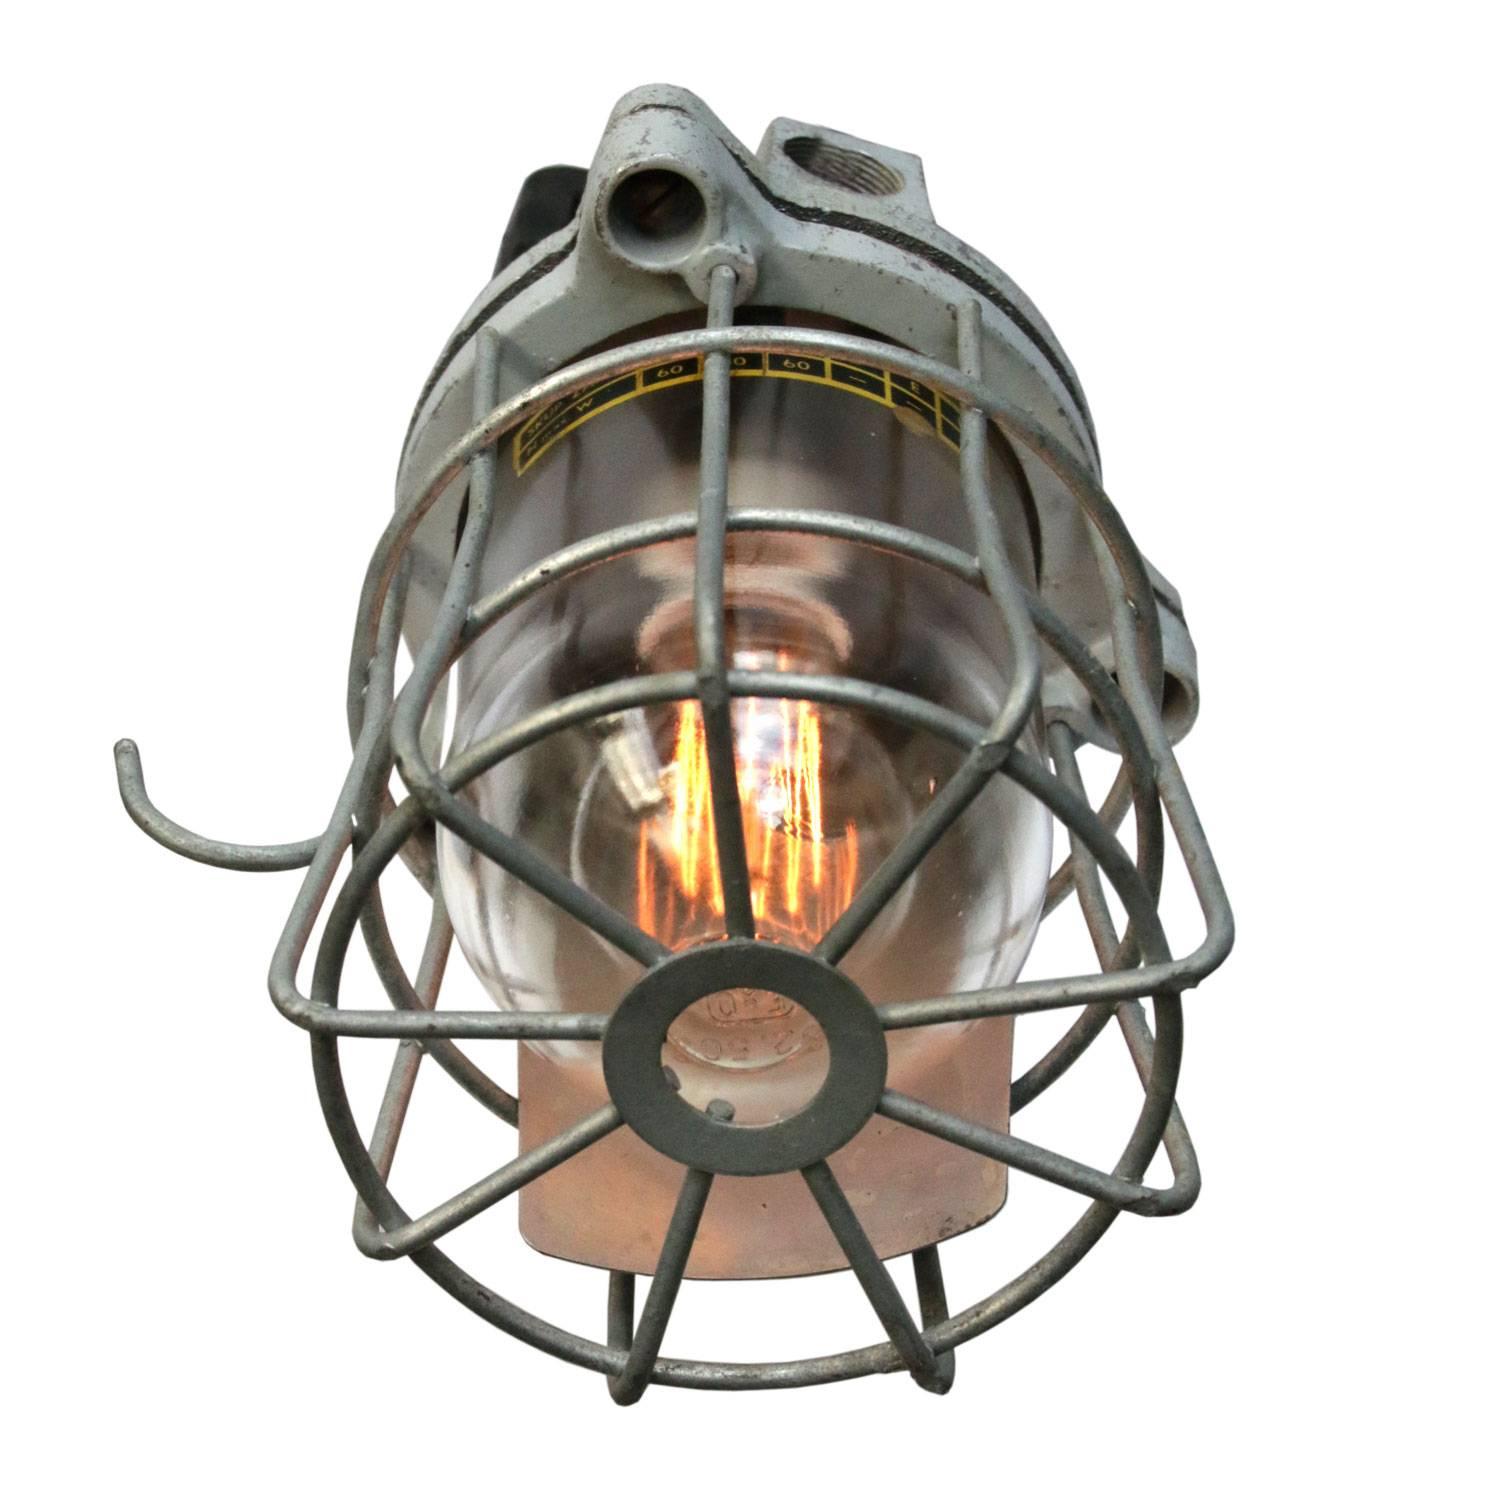 Vintage European Industrial pendant. Cast aluminium. Clear glass.

Weight 4.0 kg / 8.8 lb

All lamps have been made suitable by international standards for incandescent light bulbs, energy-efficient and LED bulbs. E26/E27 bulb holders and new